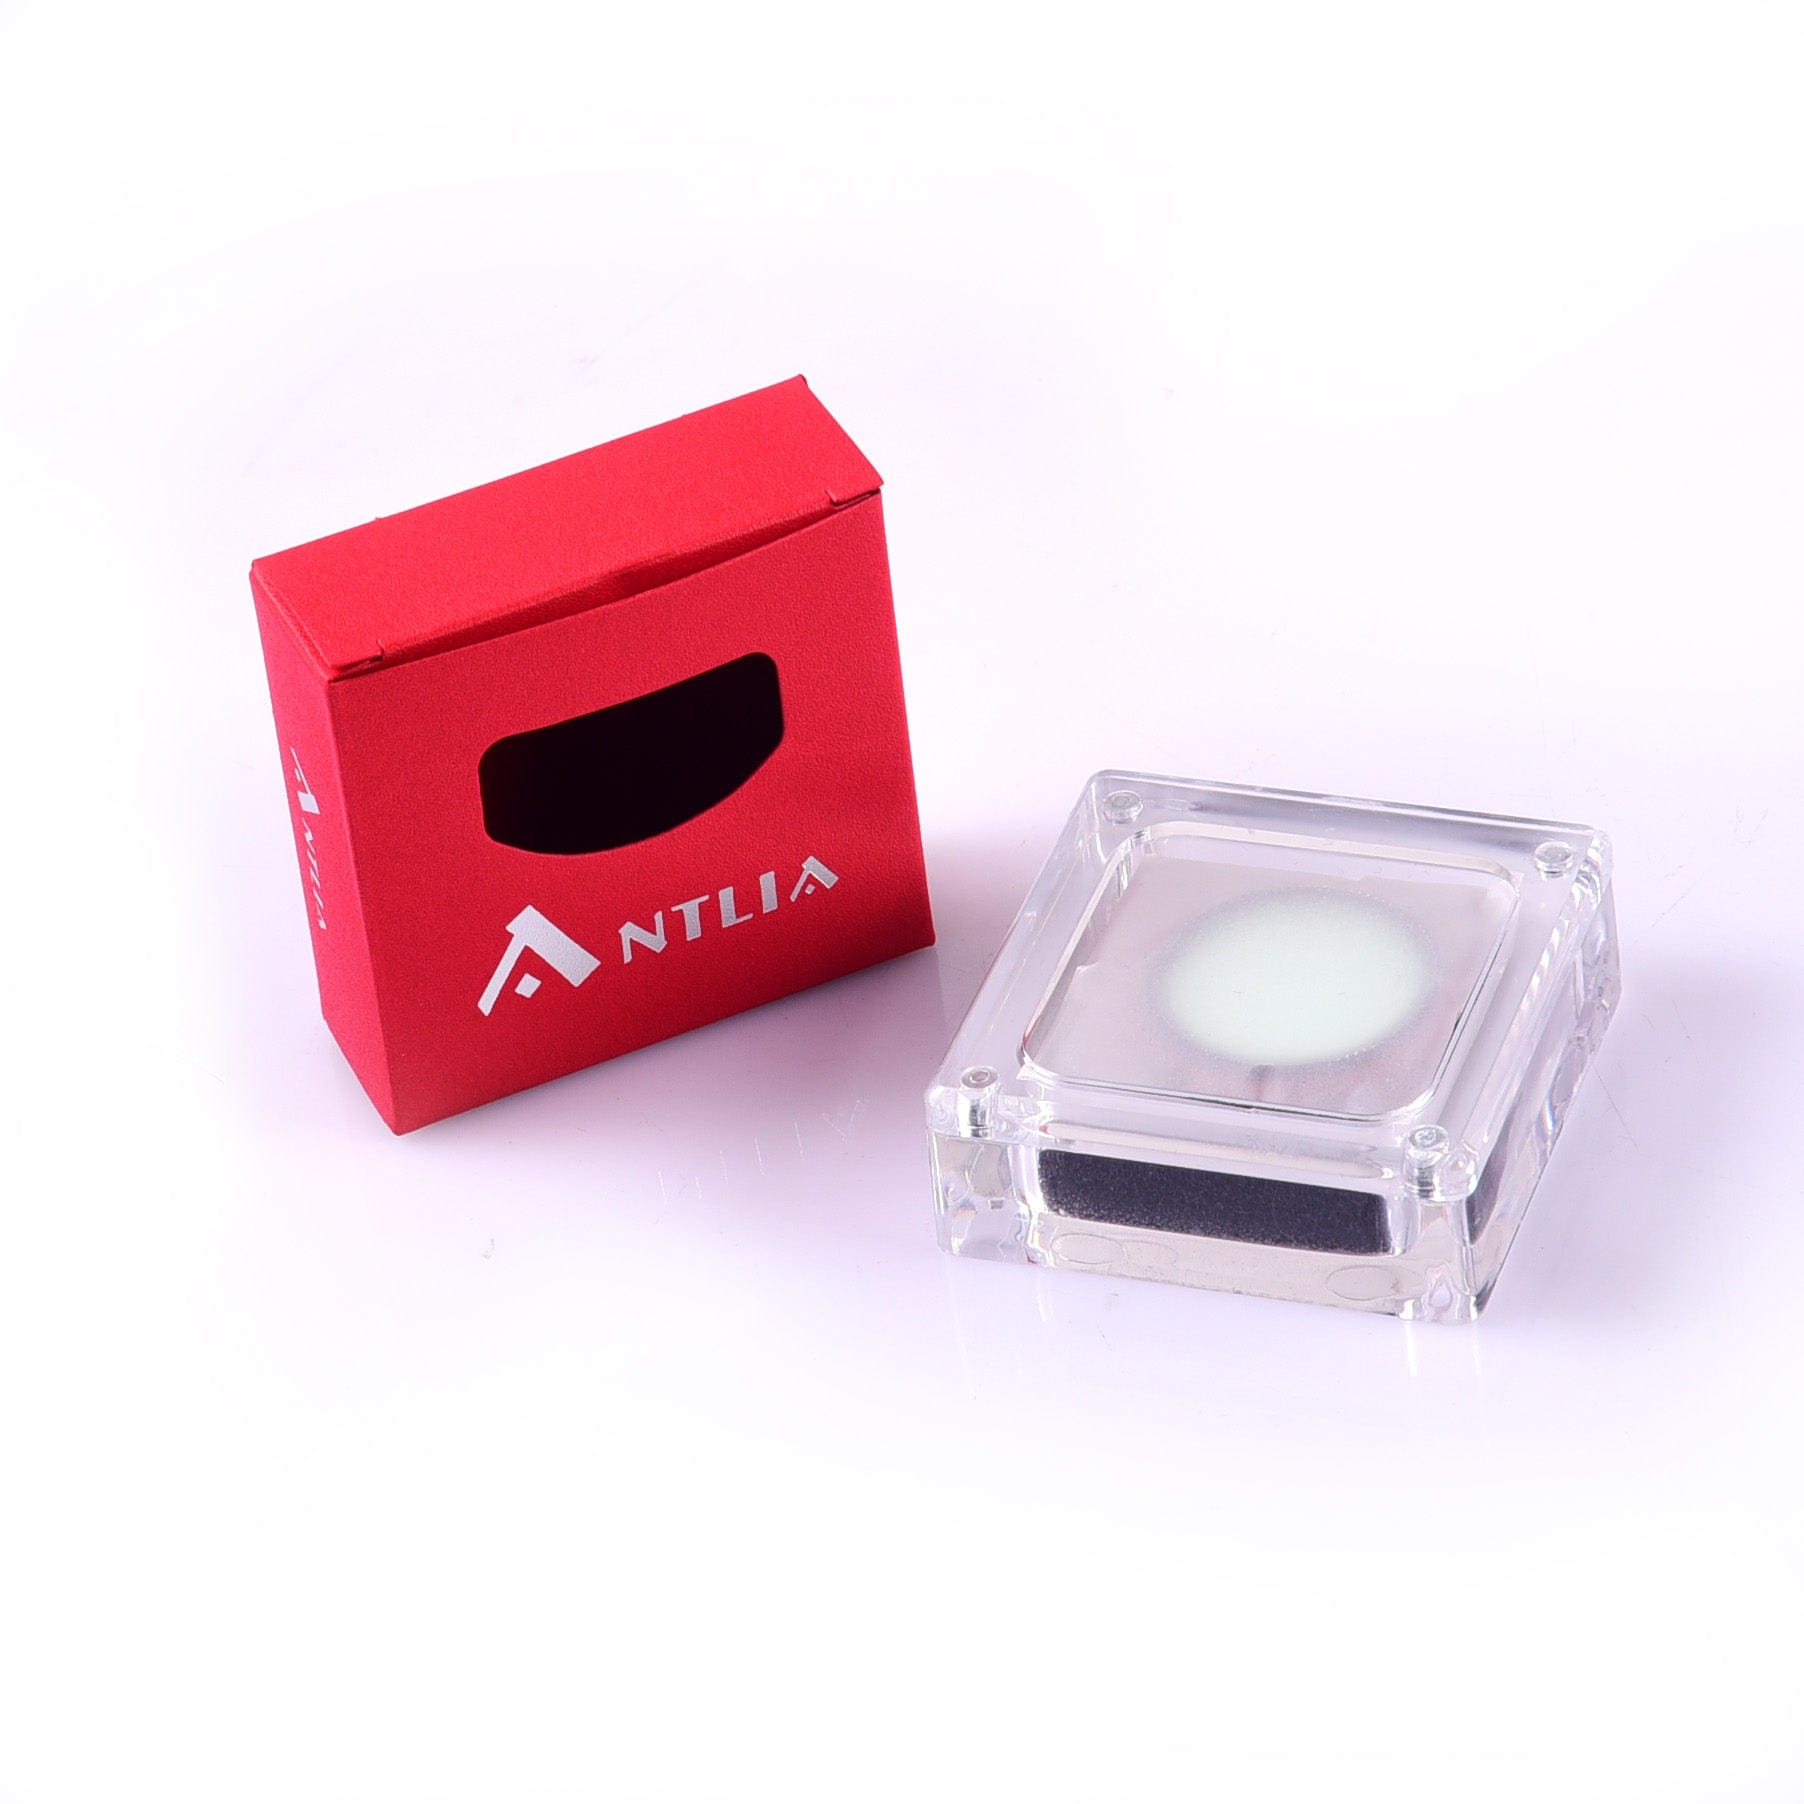 Antlia Filter Antlia H-beta and OIII Filter for the Visual and Photography